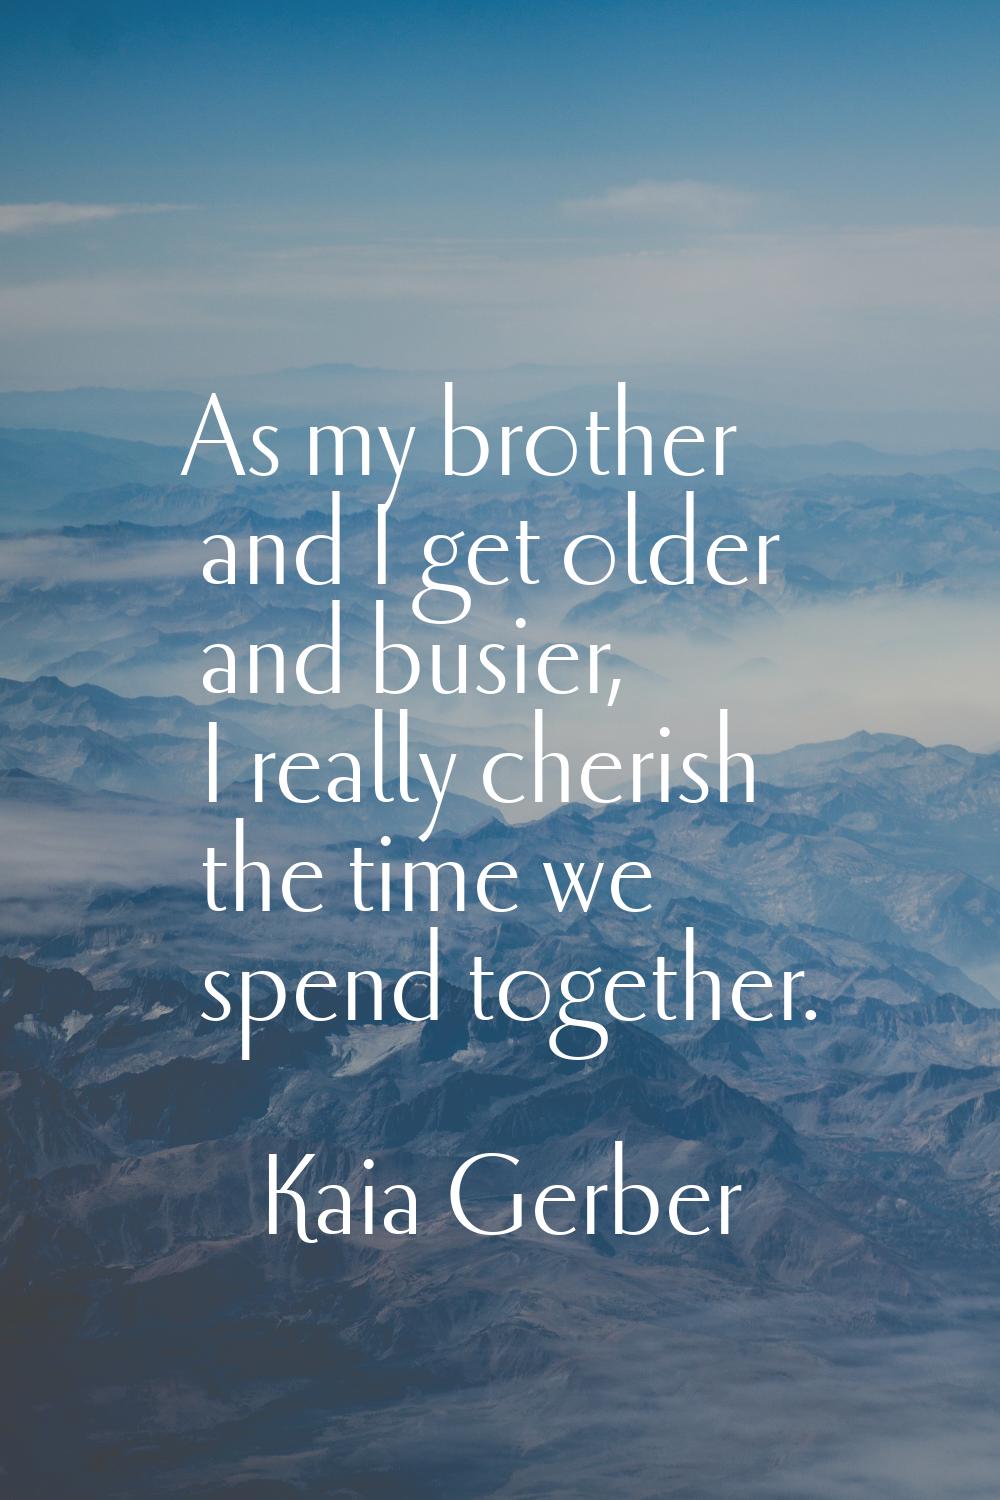 As my brother and I get older and busier, I really cherish the time we spend together.